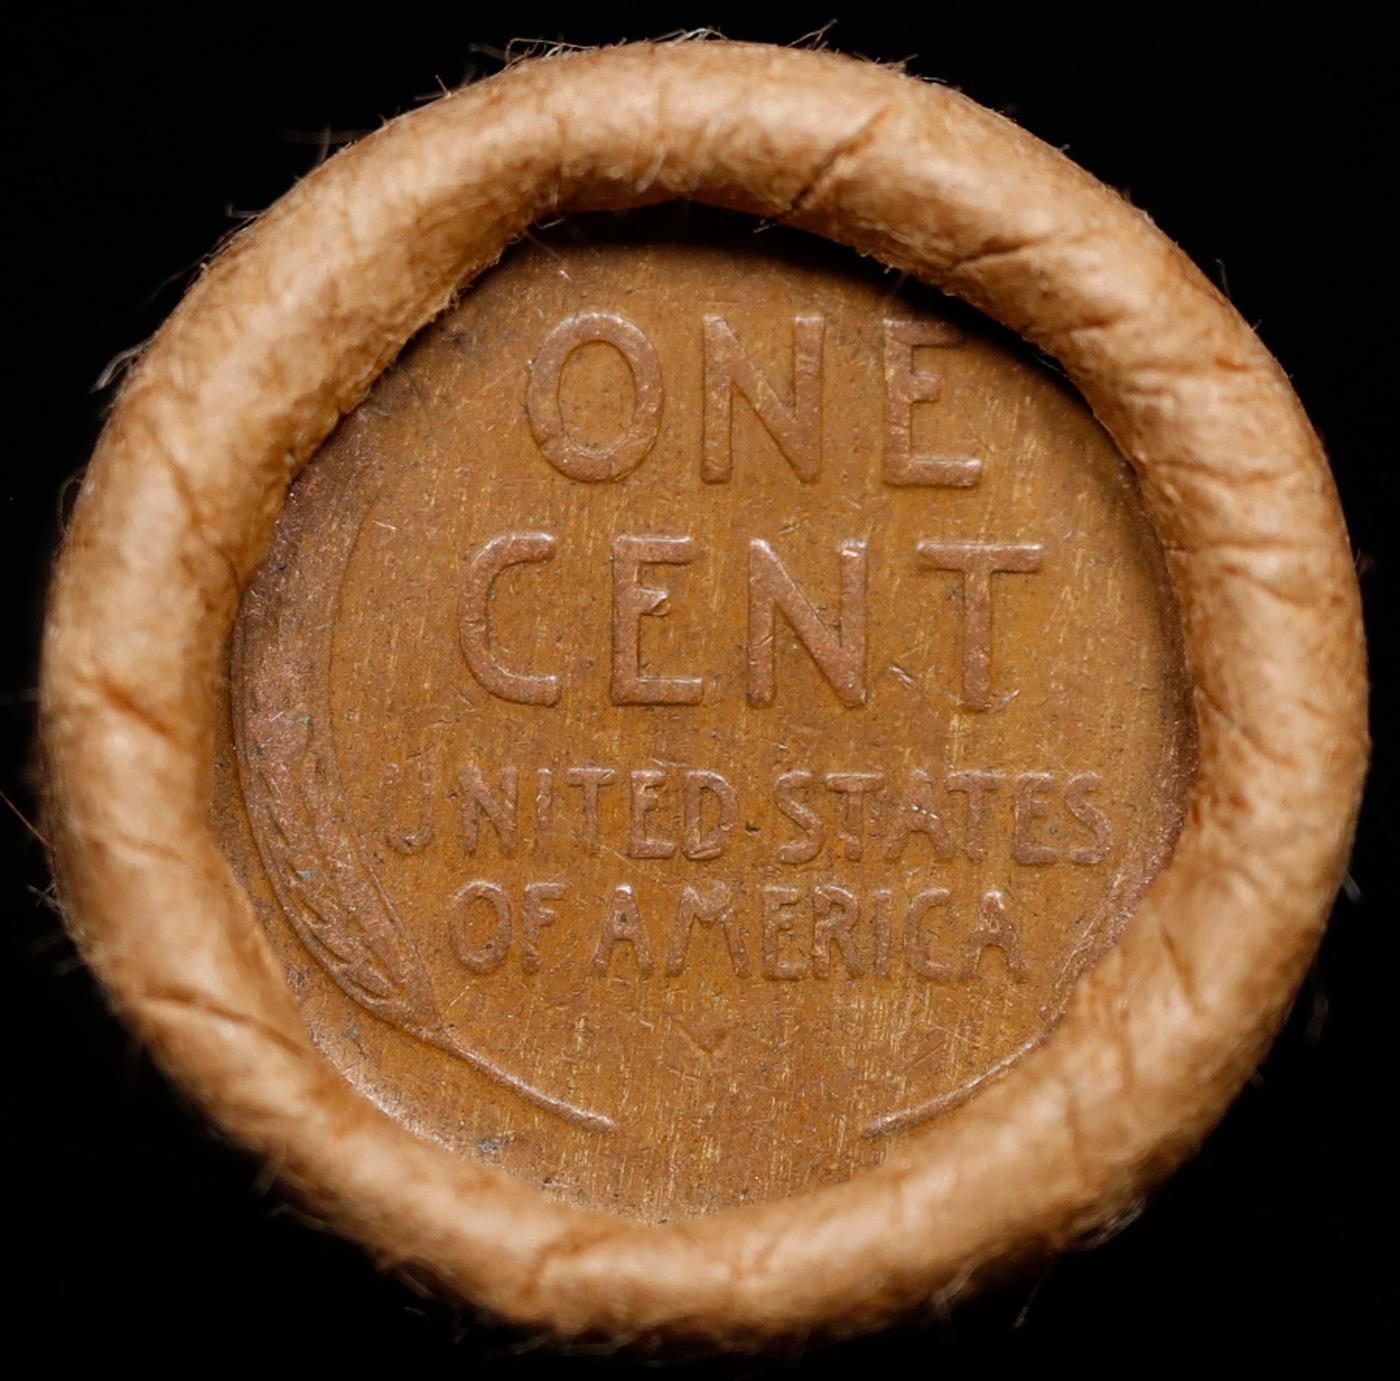 Lincoln Wheat Cent 1c Mixed Roll Orig Brandt McDonalds Wrapper, 1918-p end, Wheat other end